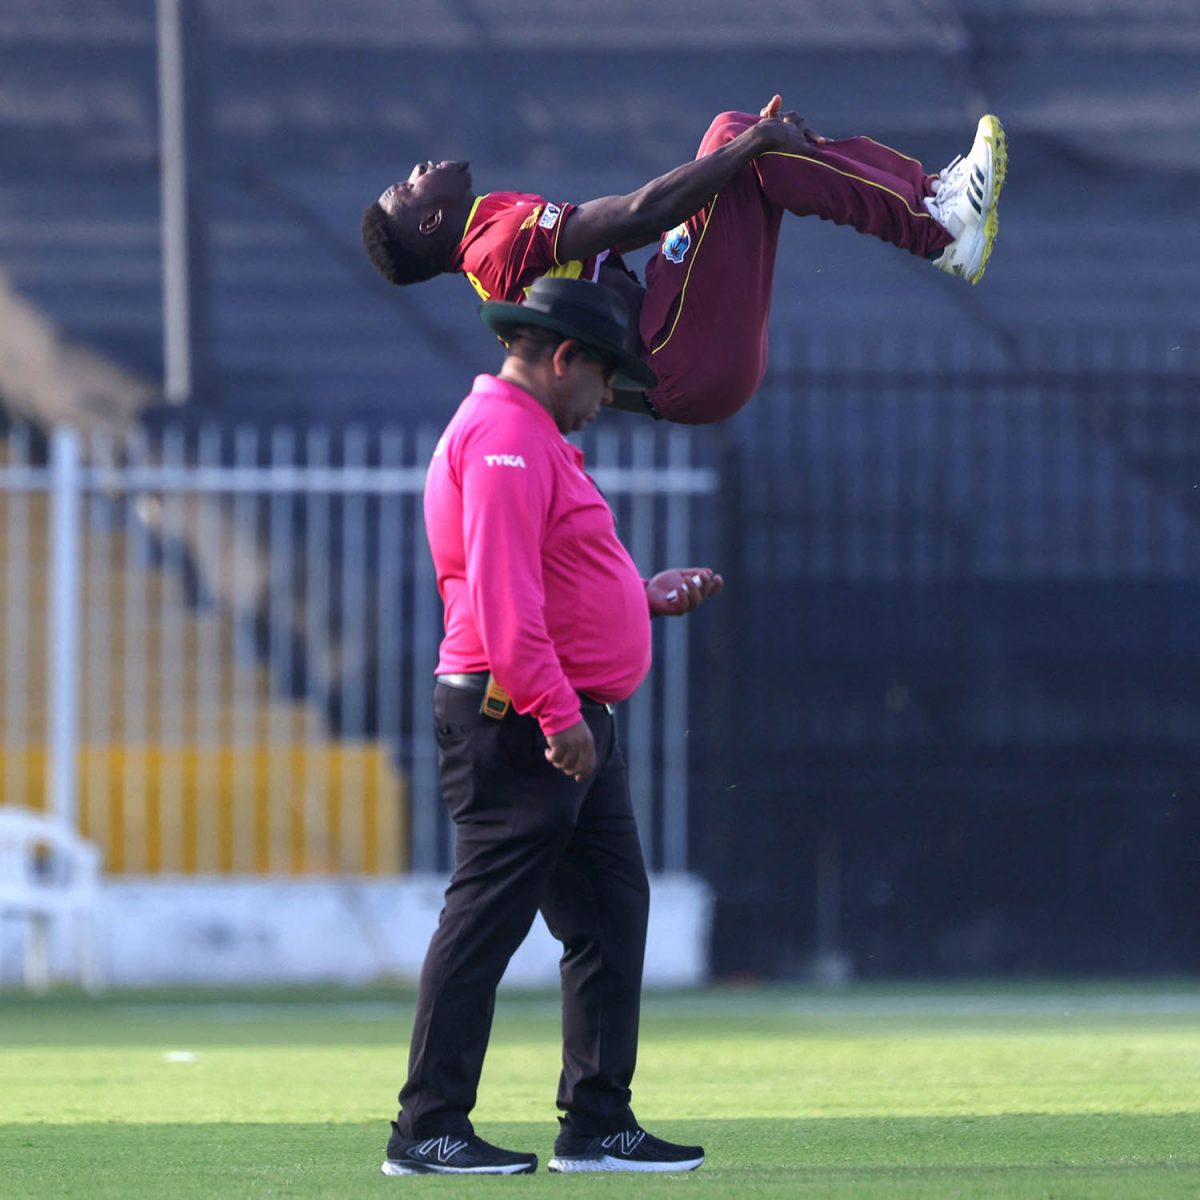 West Indies off-spinner Kevin Sinclair is head over heels with joy after capturing another wicket during his Man of the Match bowling performance of 4-24 against the United Arab Emirates yesterday.